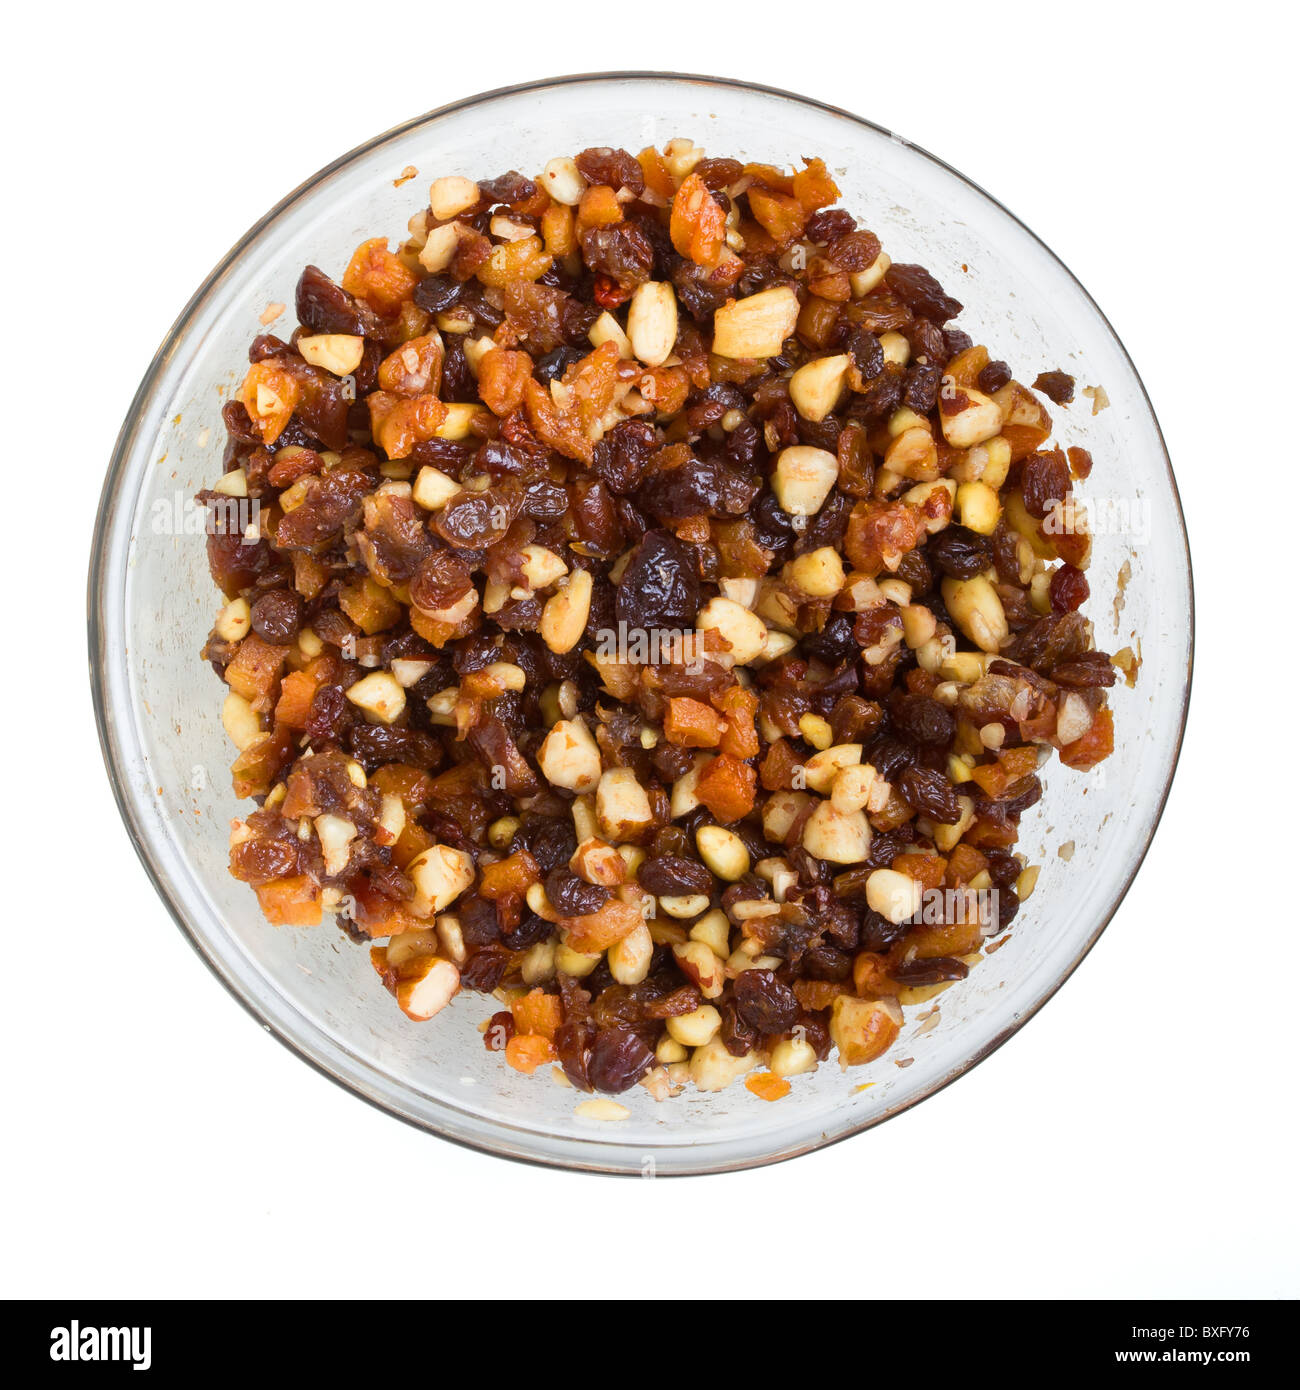 Overhead view of Xmas Cake Mix of nuts and soft fruits soaking up added rum, brandy and sherry. Stock Photo